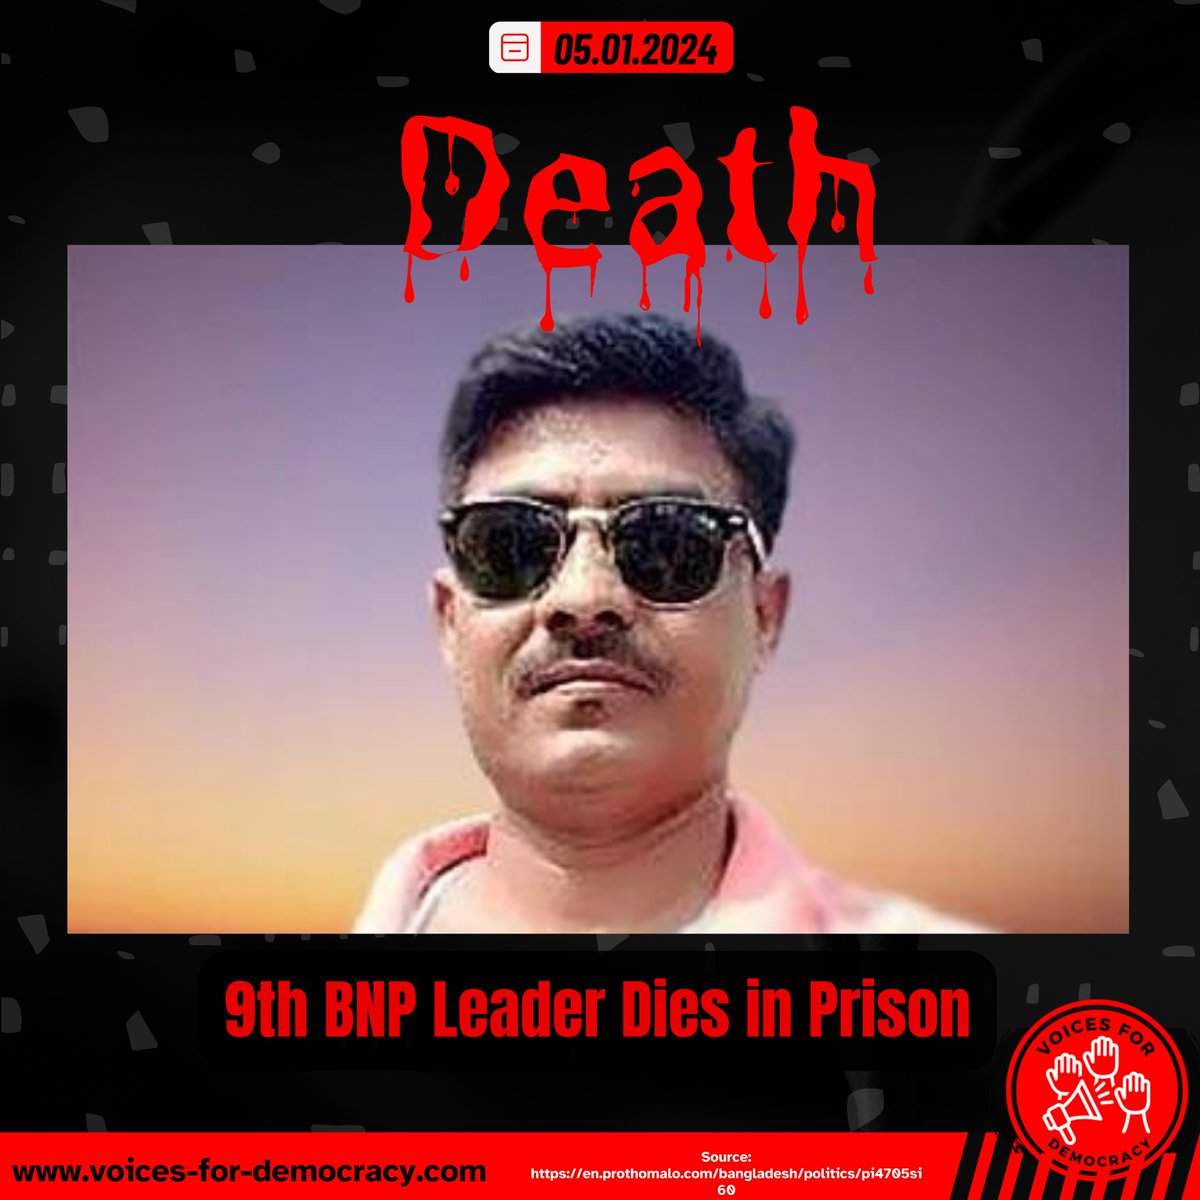 Bangladesh: Kamal Hossain, was an executive committee member of Khulna city unit of BNP’s youth wing Jubo Dal. Kamal was rushed to Bagerhat Sadar Hospital after he had been found unconscious in his cell on Tuesday night. Doctors declared him dead as soon as he was taken to the